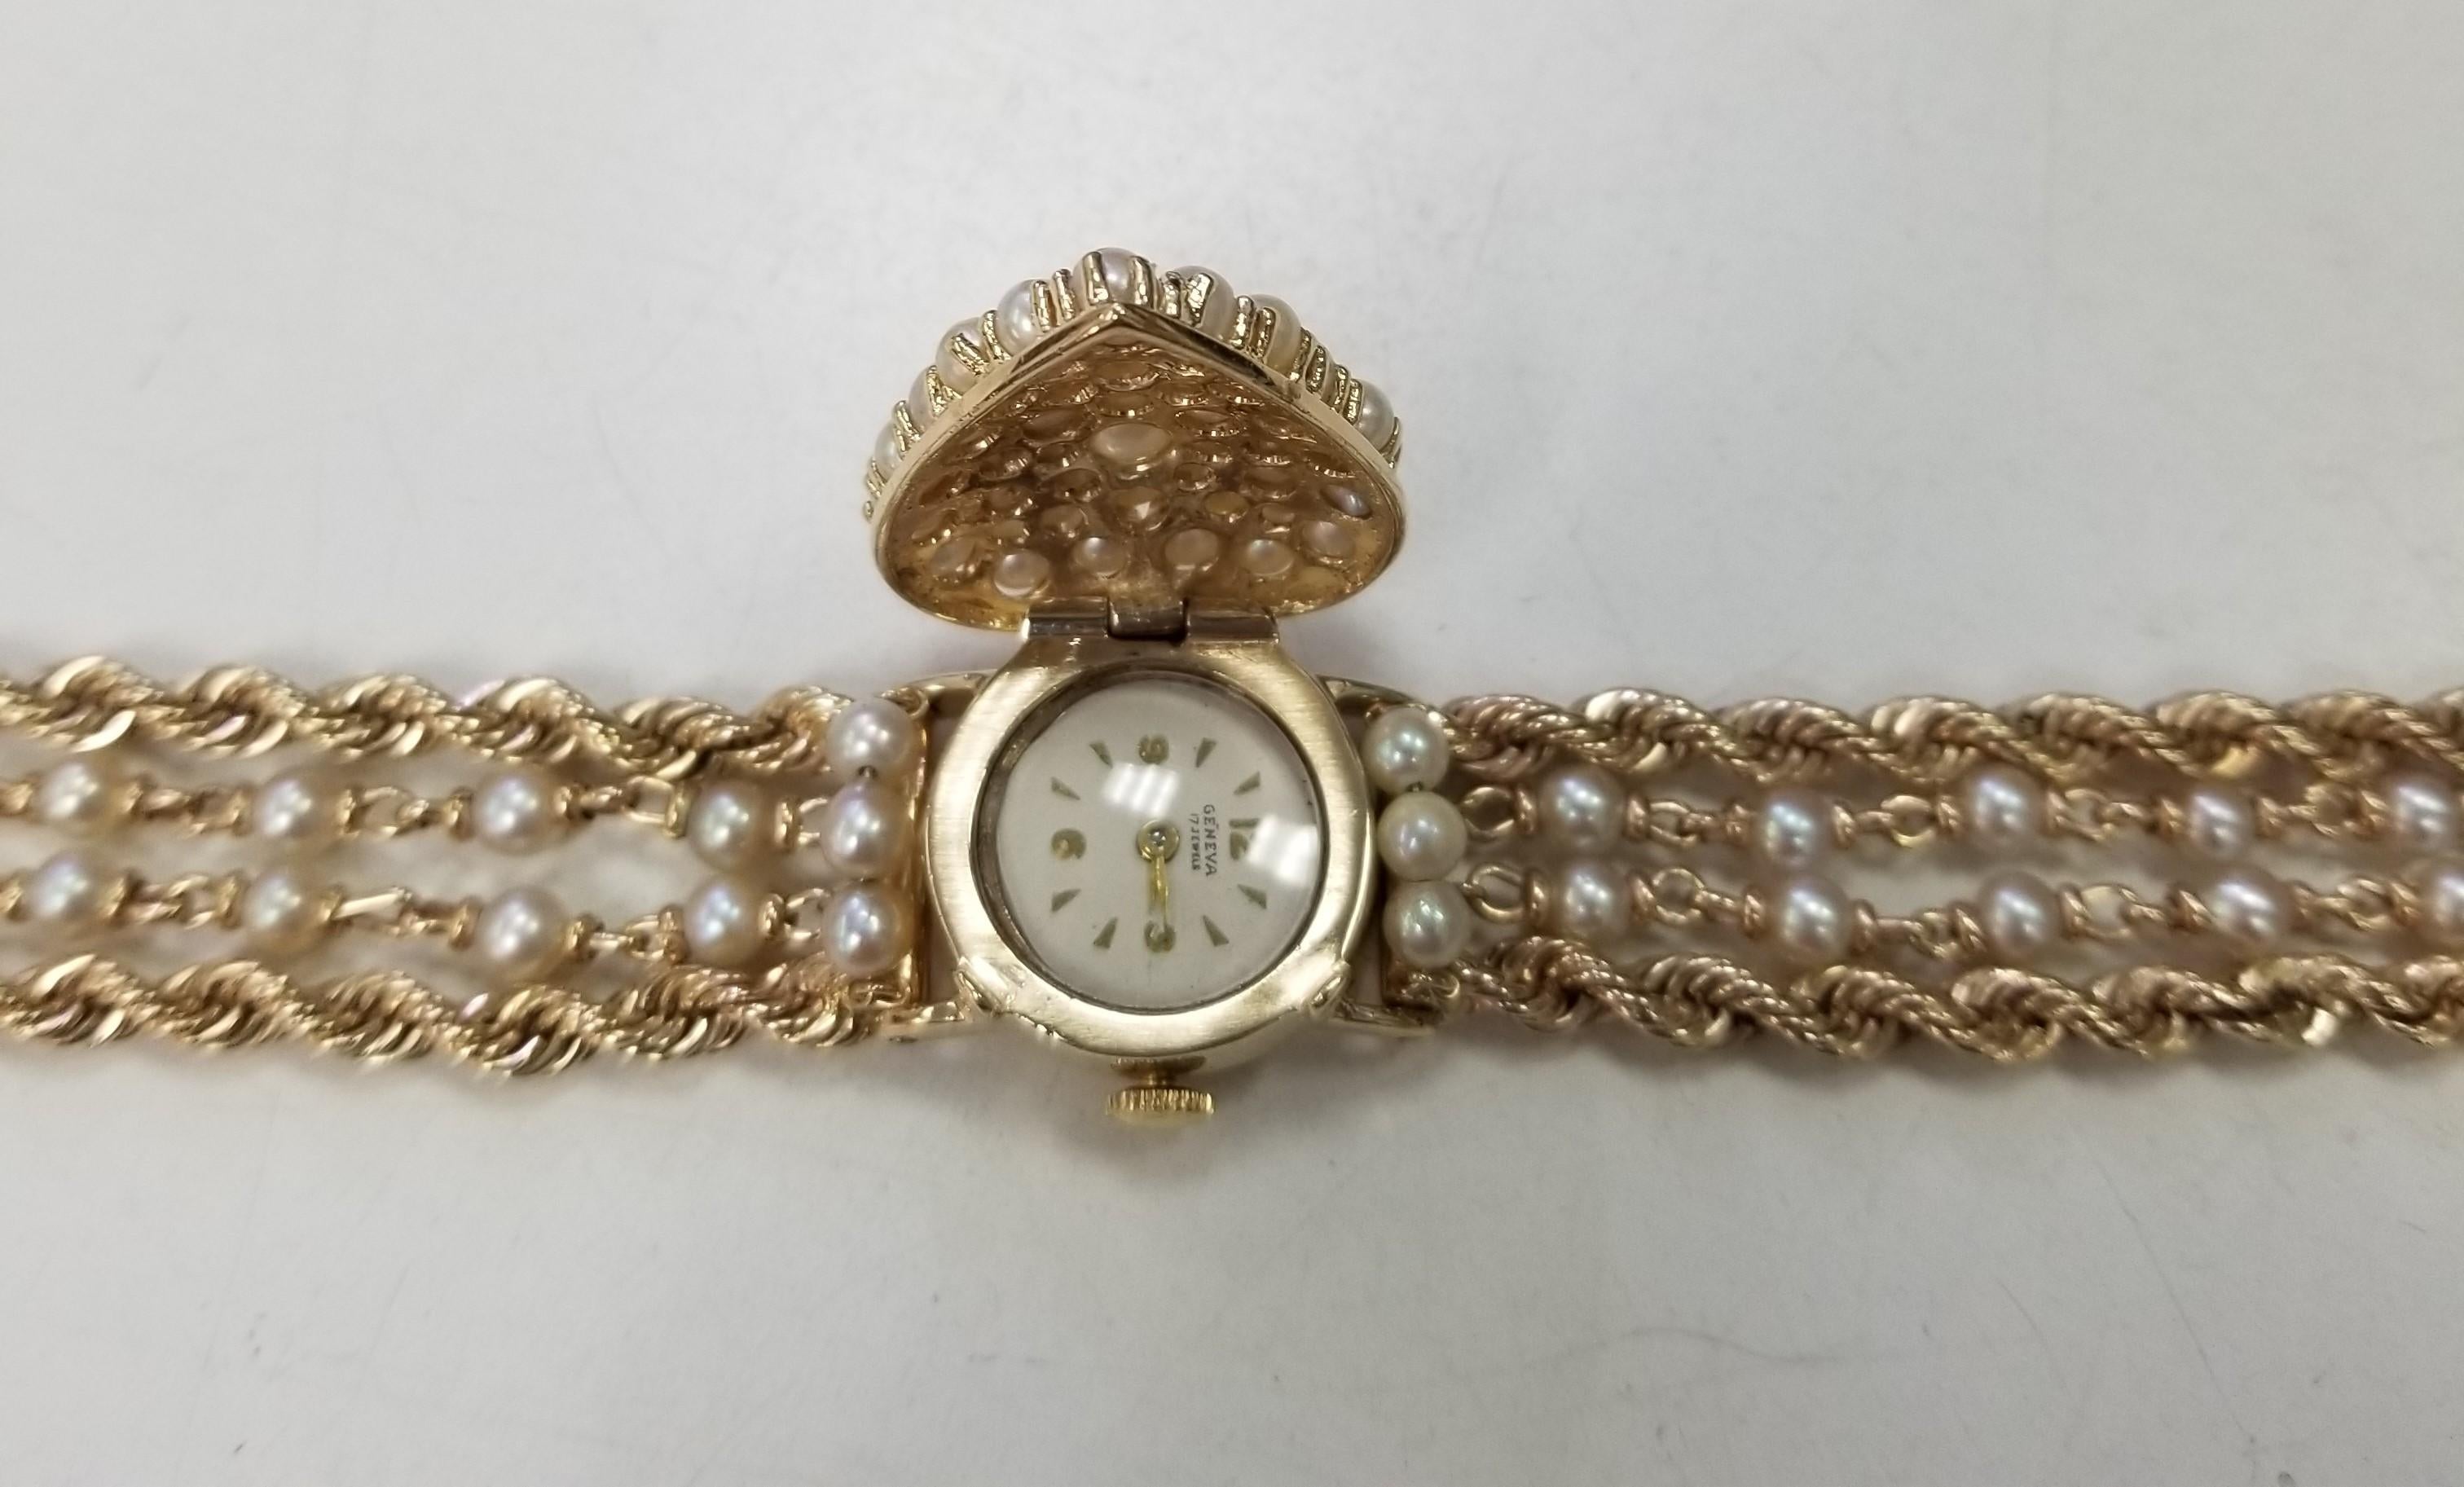 Vintage Geneve 14 Karat Yellow Pearl & Gold Rope Bracelet watch with hidden Watch.  The watch is a Geneve 17 jewel manual movement with a safety clasp.  The Watch has a serviced movement.  The width is 26mm and weighs 73 grams. The whole watch